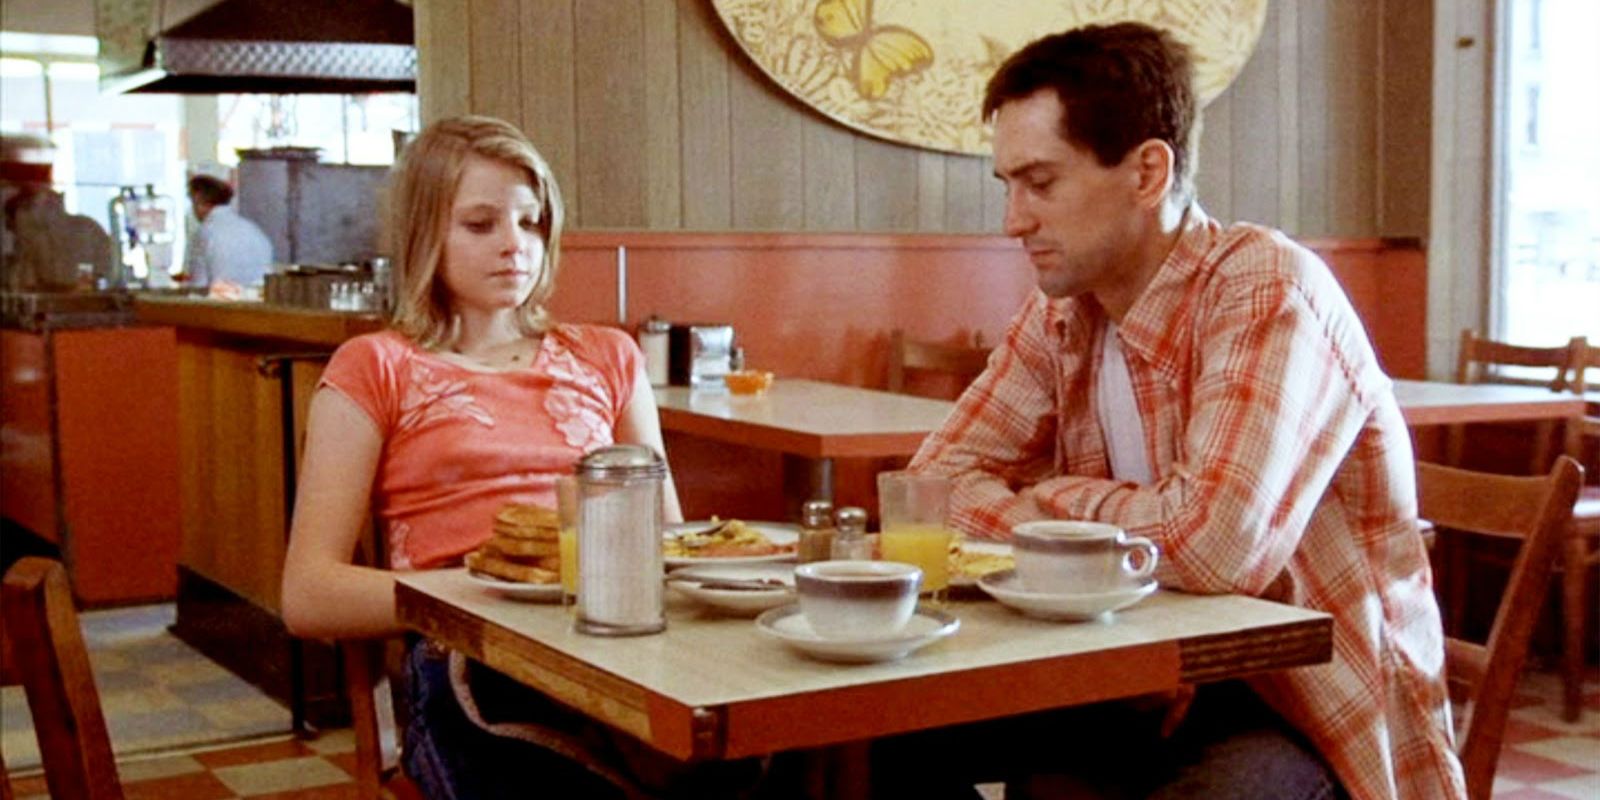 Jodie Foster and Robert DeNiro in Taxi Driver